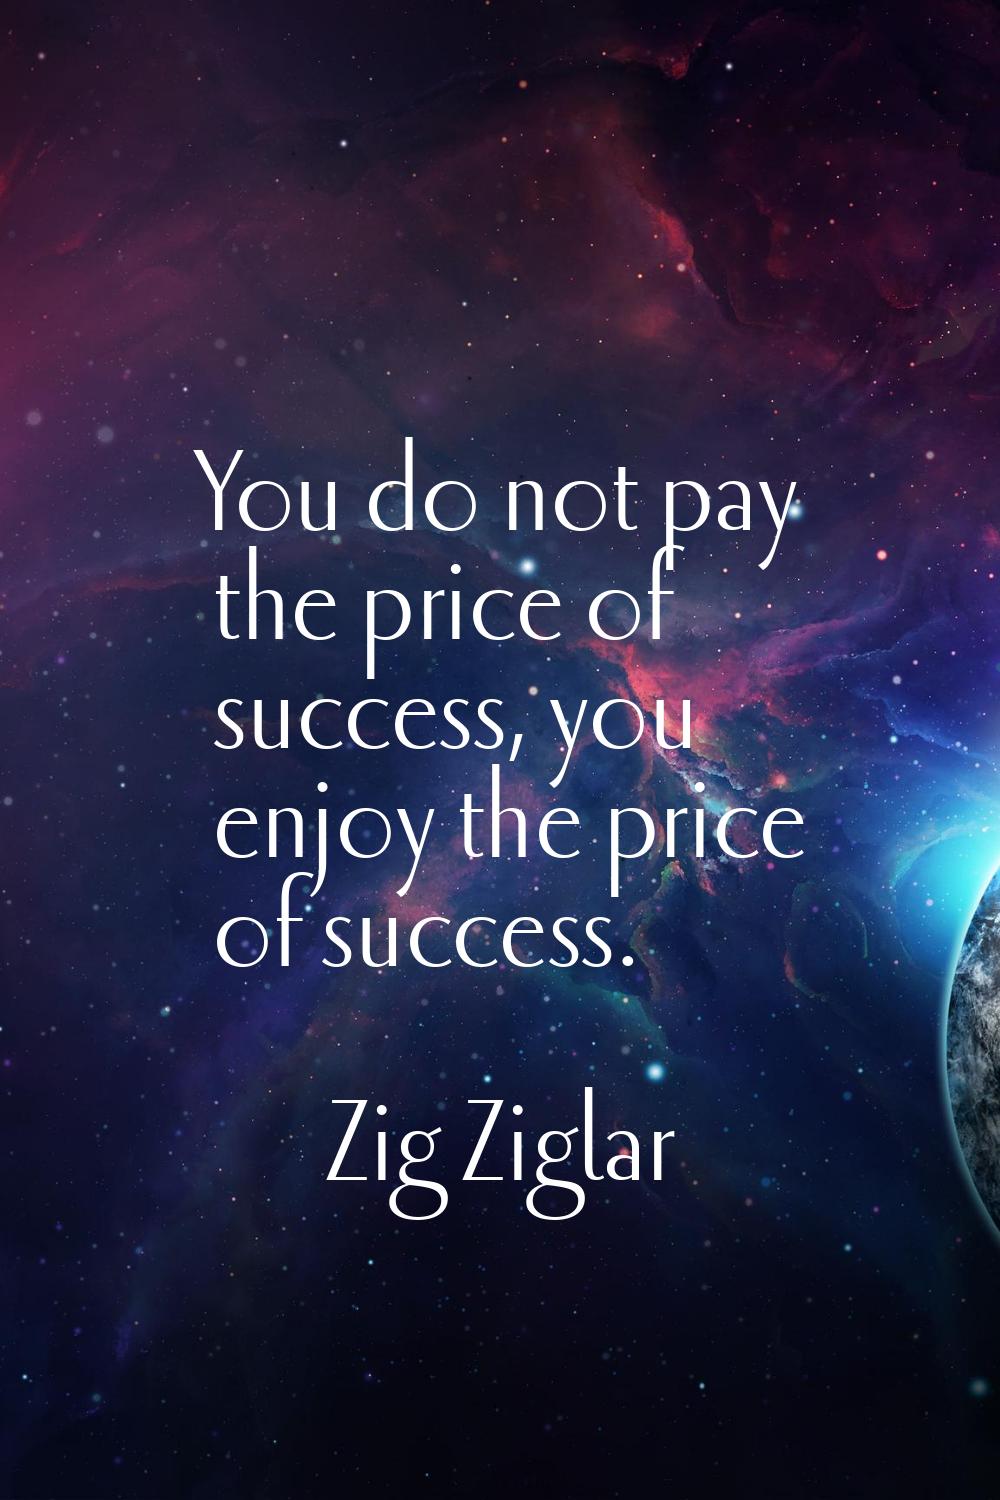 You do not pay the price of success, you enjoy the price of success.